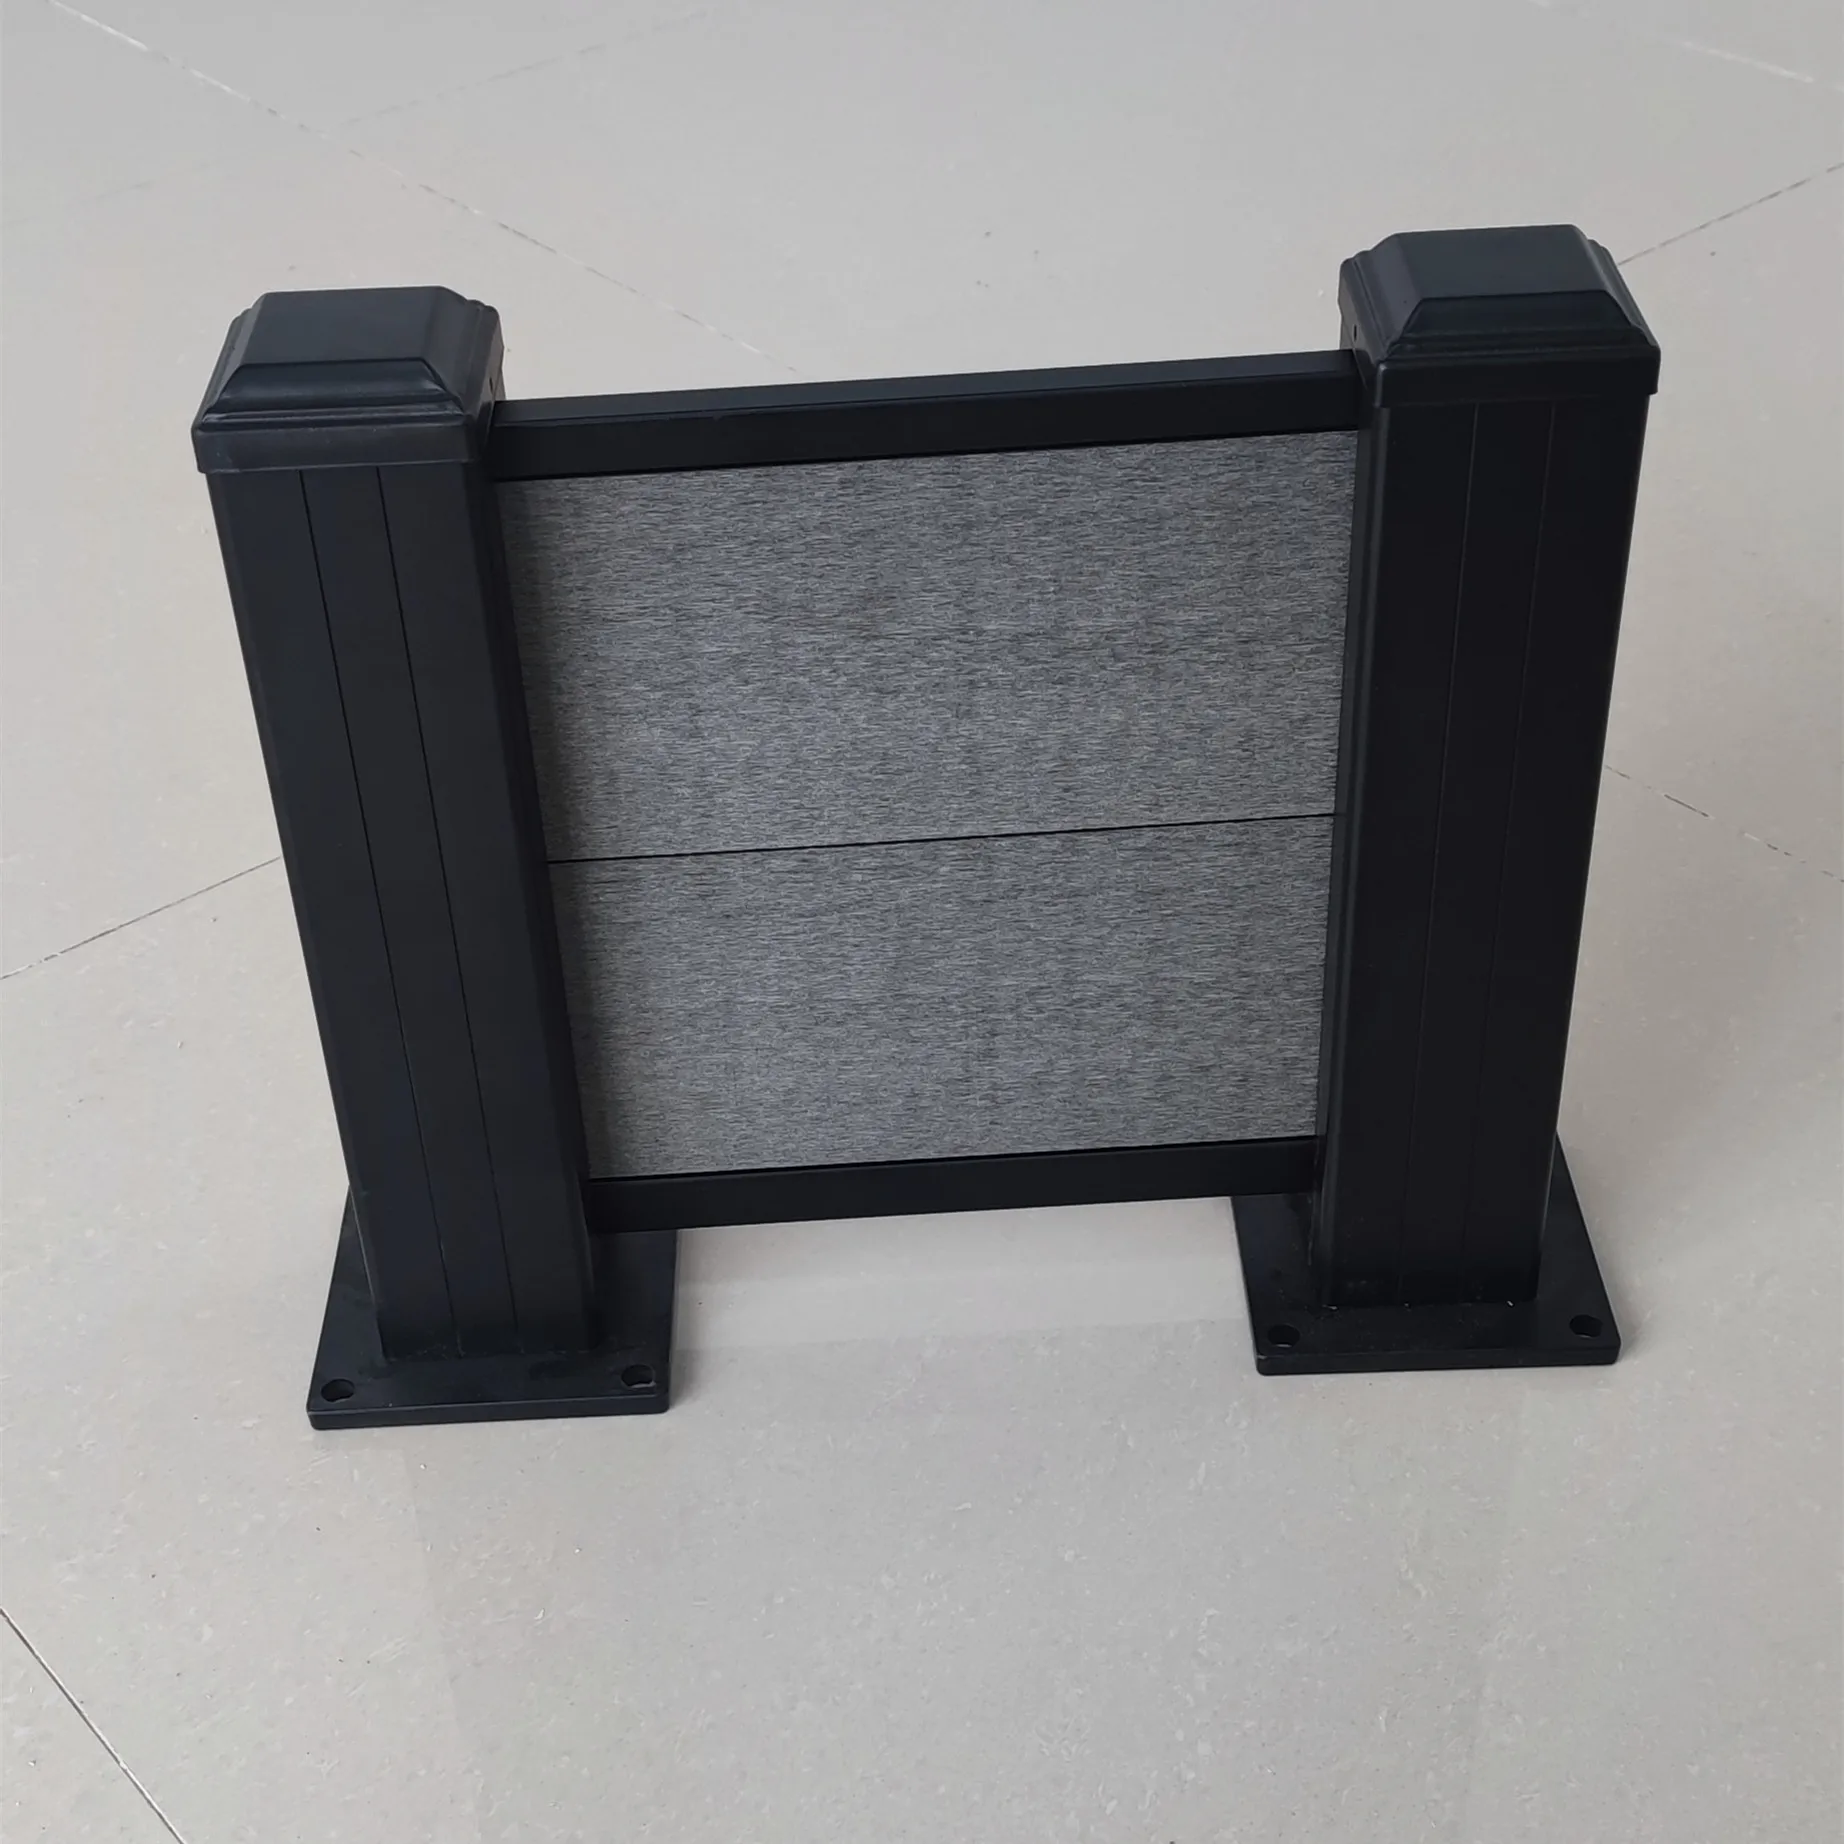 
New universal Aluminium materials WPC screen post with frame kits for garden screen fencing stand 